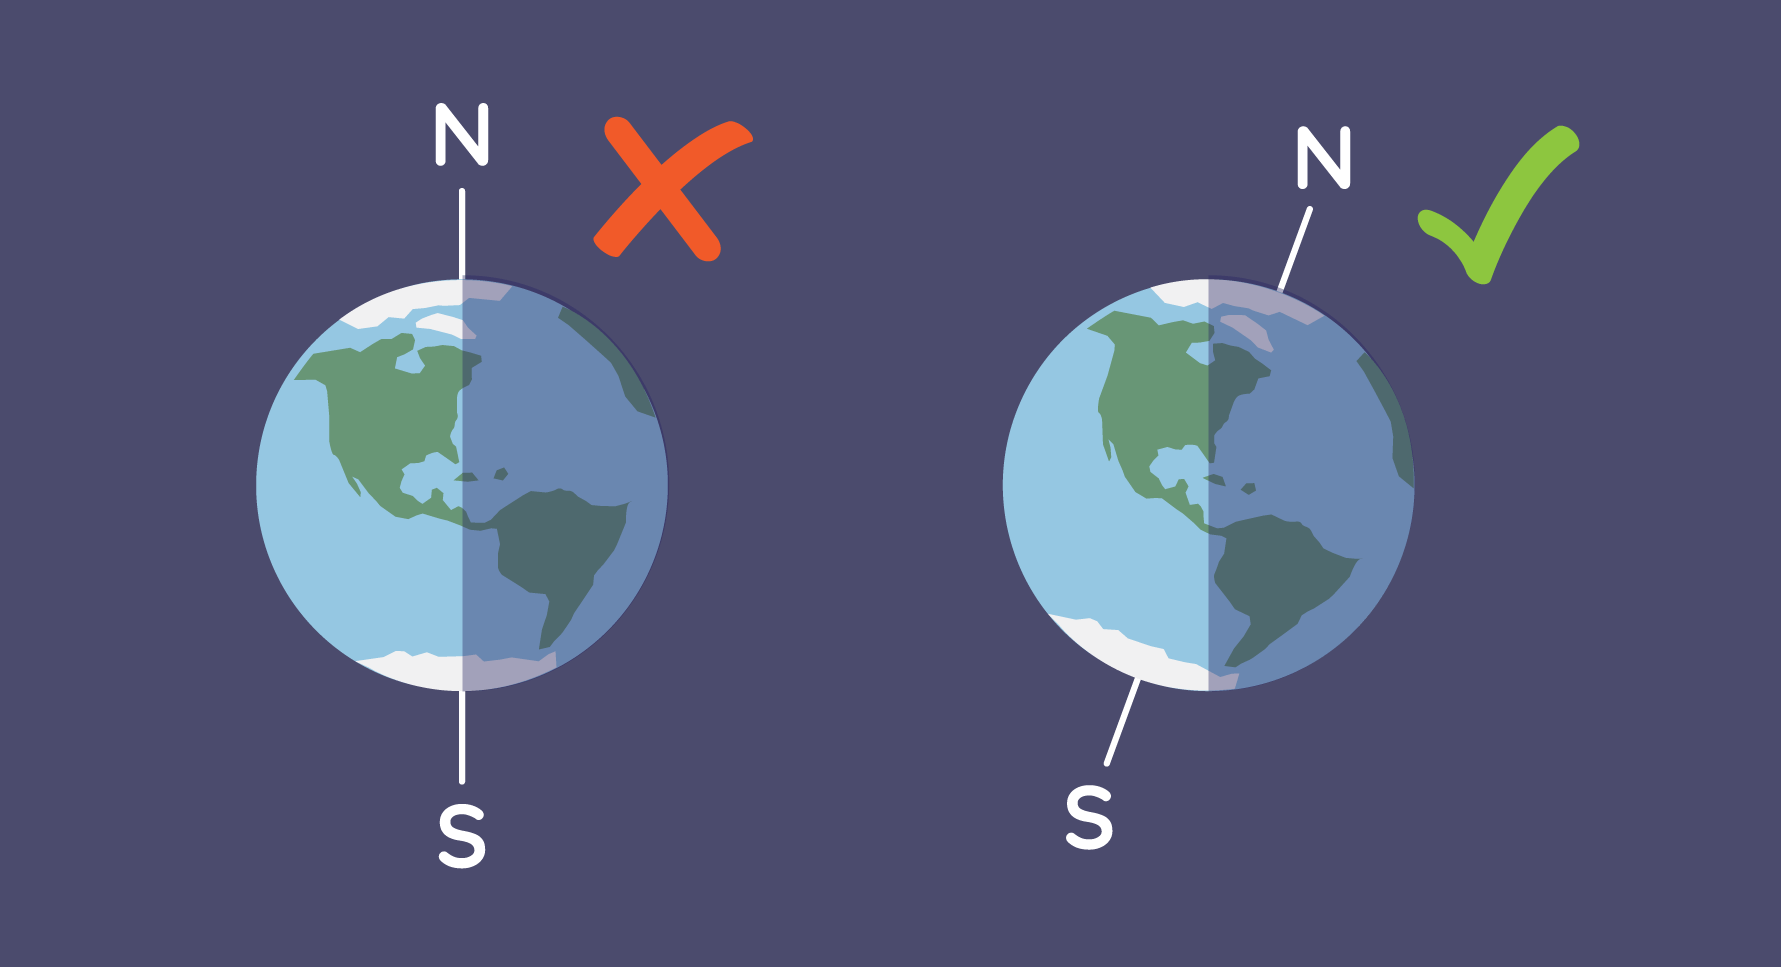 There are two graphics of the Earth in different positions. The first Earth has a white line that sticks out from the top and is labeled with the letter N. It also has a white line that sticks out from the bottom and is labeled with the letter S. These lines and the Earth are straight up and down. It has a red x next to it. In the second drawing, Earth has the same lines labeled N and S as the first Earth, but the lines and Earth are now tilted to the right about 23 degrees. The Earth on the right has a green checkmark next to it to denote that it is in the correct position. Each Earth has a shadow over the right half of the planet to show where sunlight does not reach as Earth rotates.